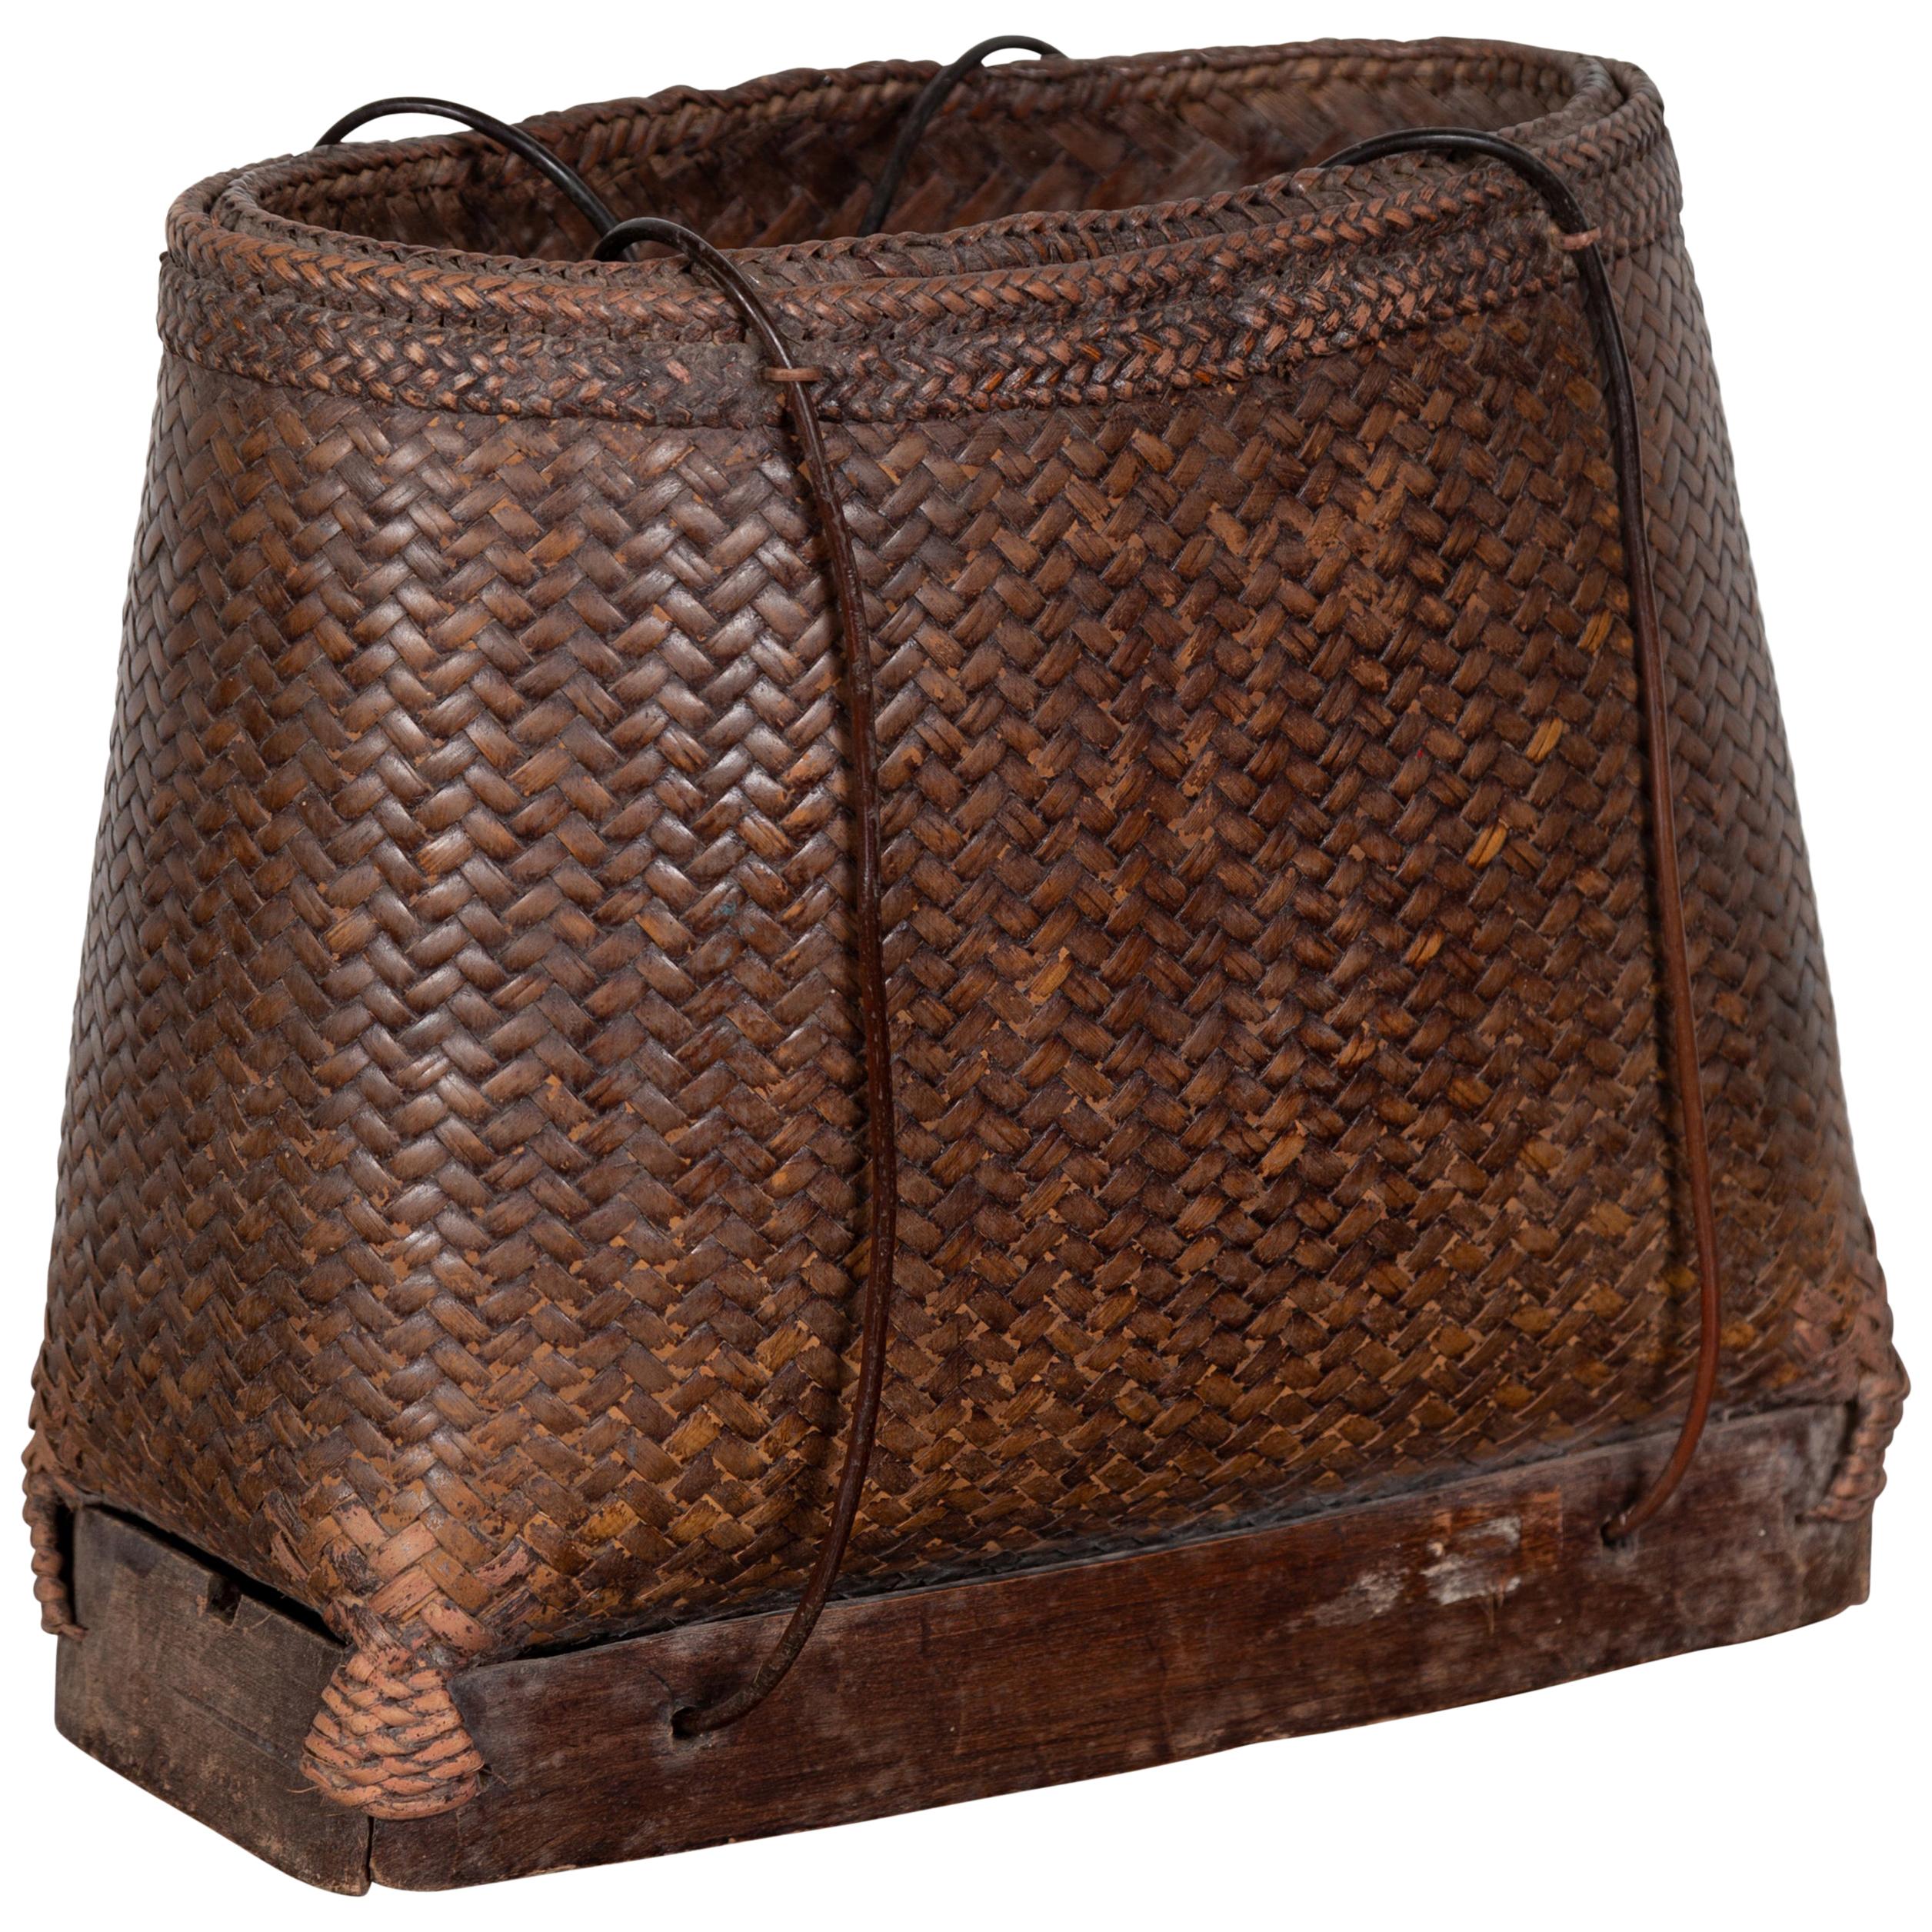 Antique Early 20th Century Small Woven Grain Basket from the Philippines For Sale